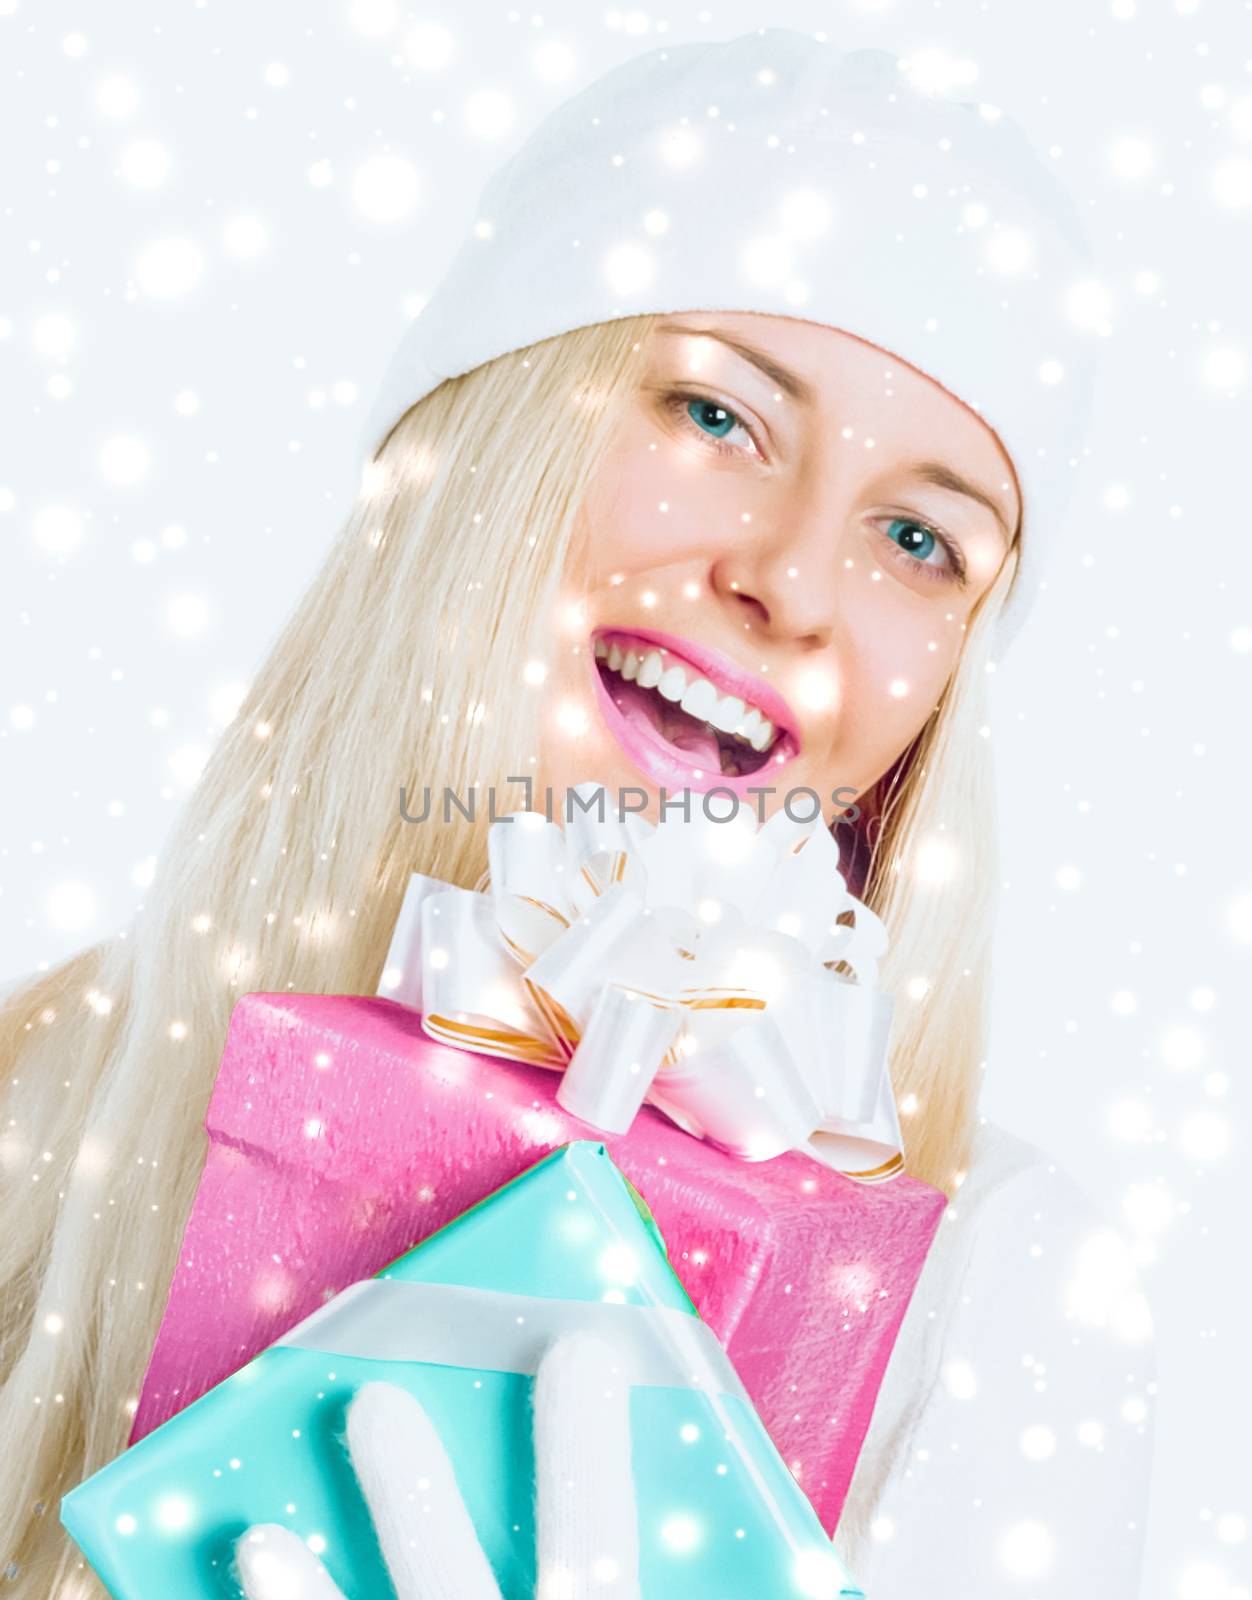 Christmas surprise and glitter snow background, happy blonde girl with gift boxes in winter season for shopping sale and holiday brands